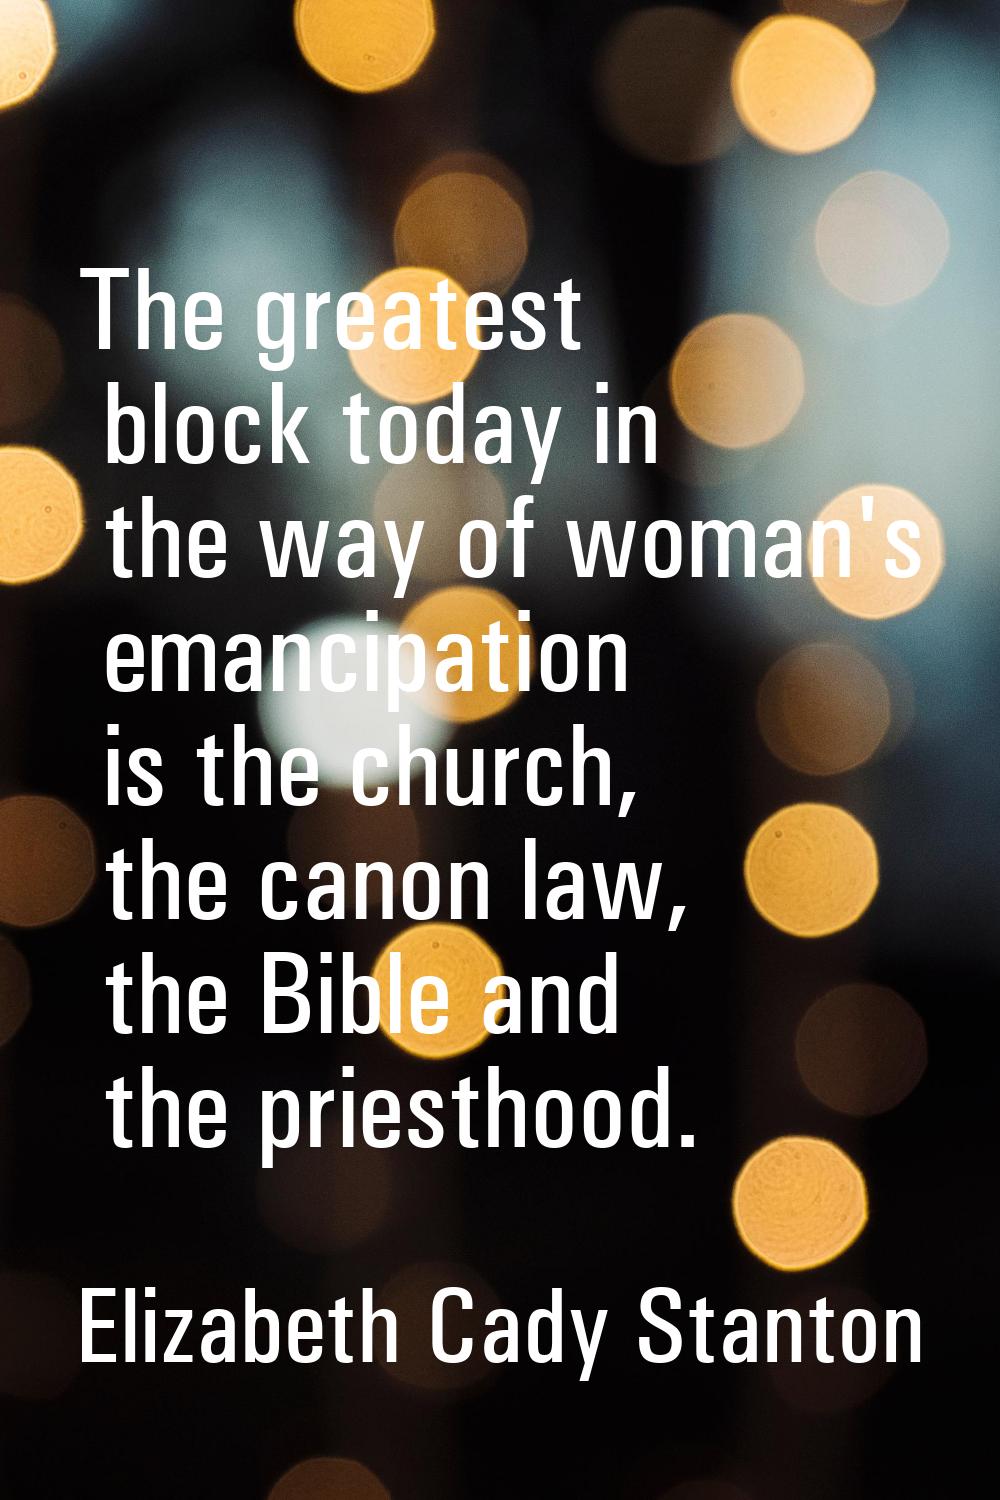 The greatest block today in the way of woman's emancipation is the church, the canon law, the Bible